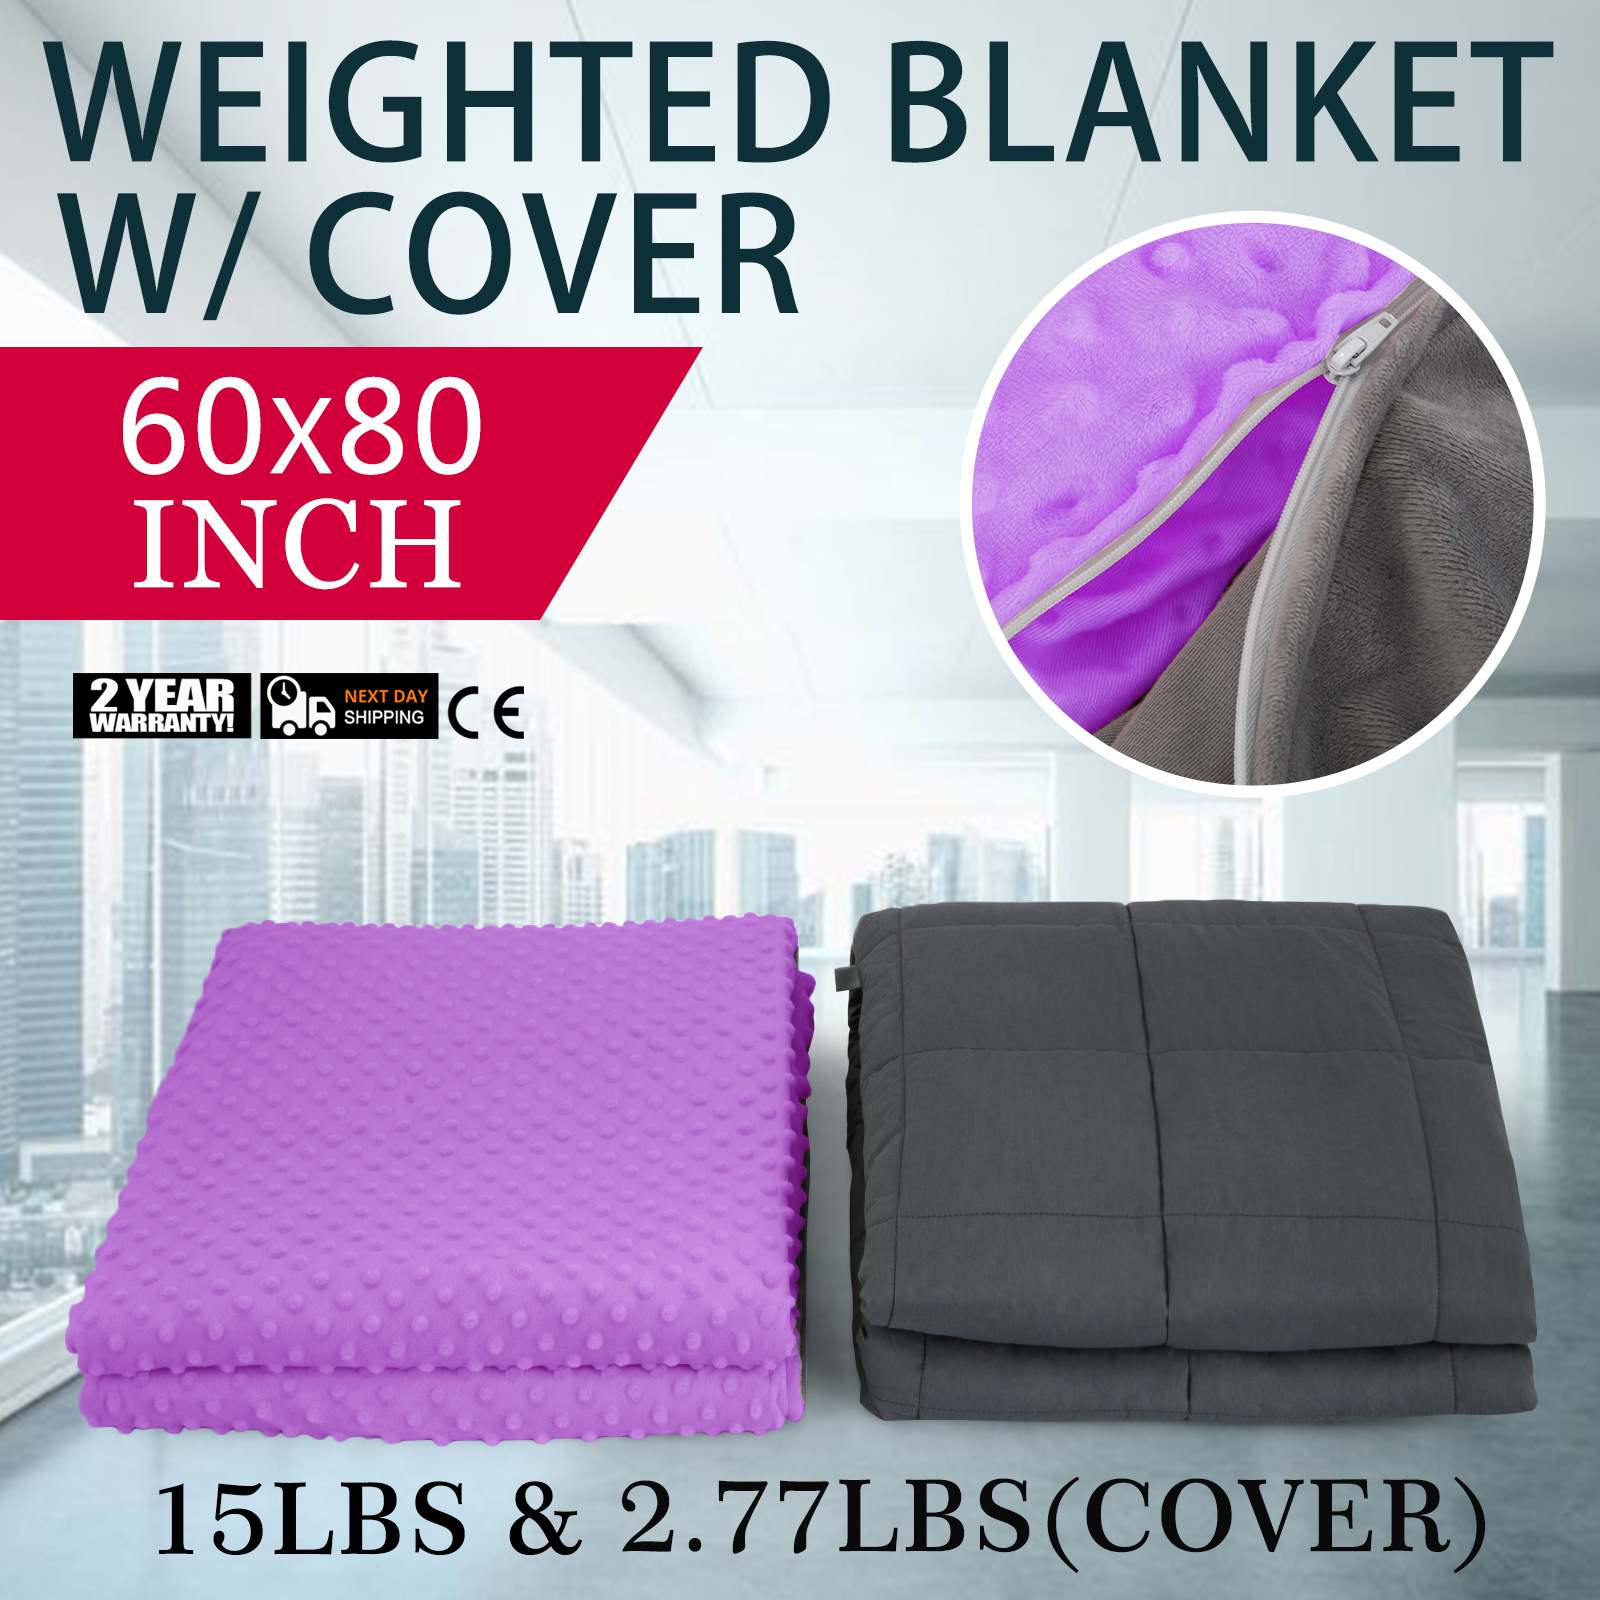 Weighted Blanket With Duvet Cover For Adult & Kids Reduce Stress 40x60" 60x80" 